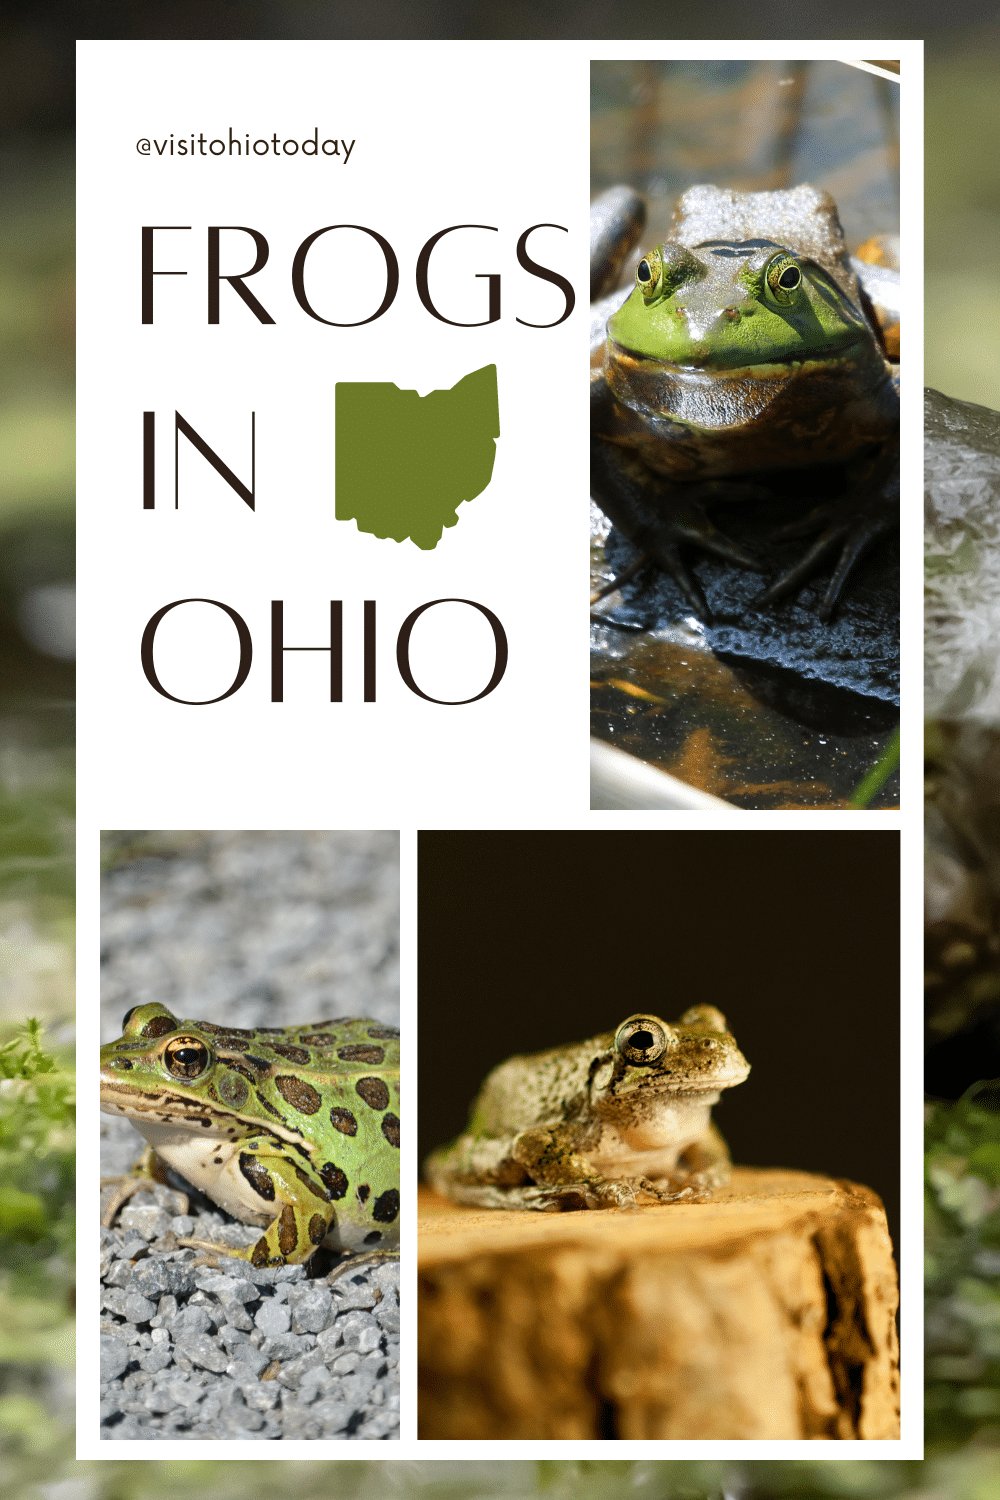 Ohio is home to at 15 species of frogs and also toads. If you are looking for some simple facts about Frogs in Ohio, this is your place. This is a simple guide to help you identify the Frogs in Ohio. #frogsinohio